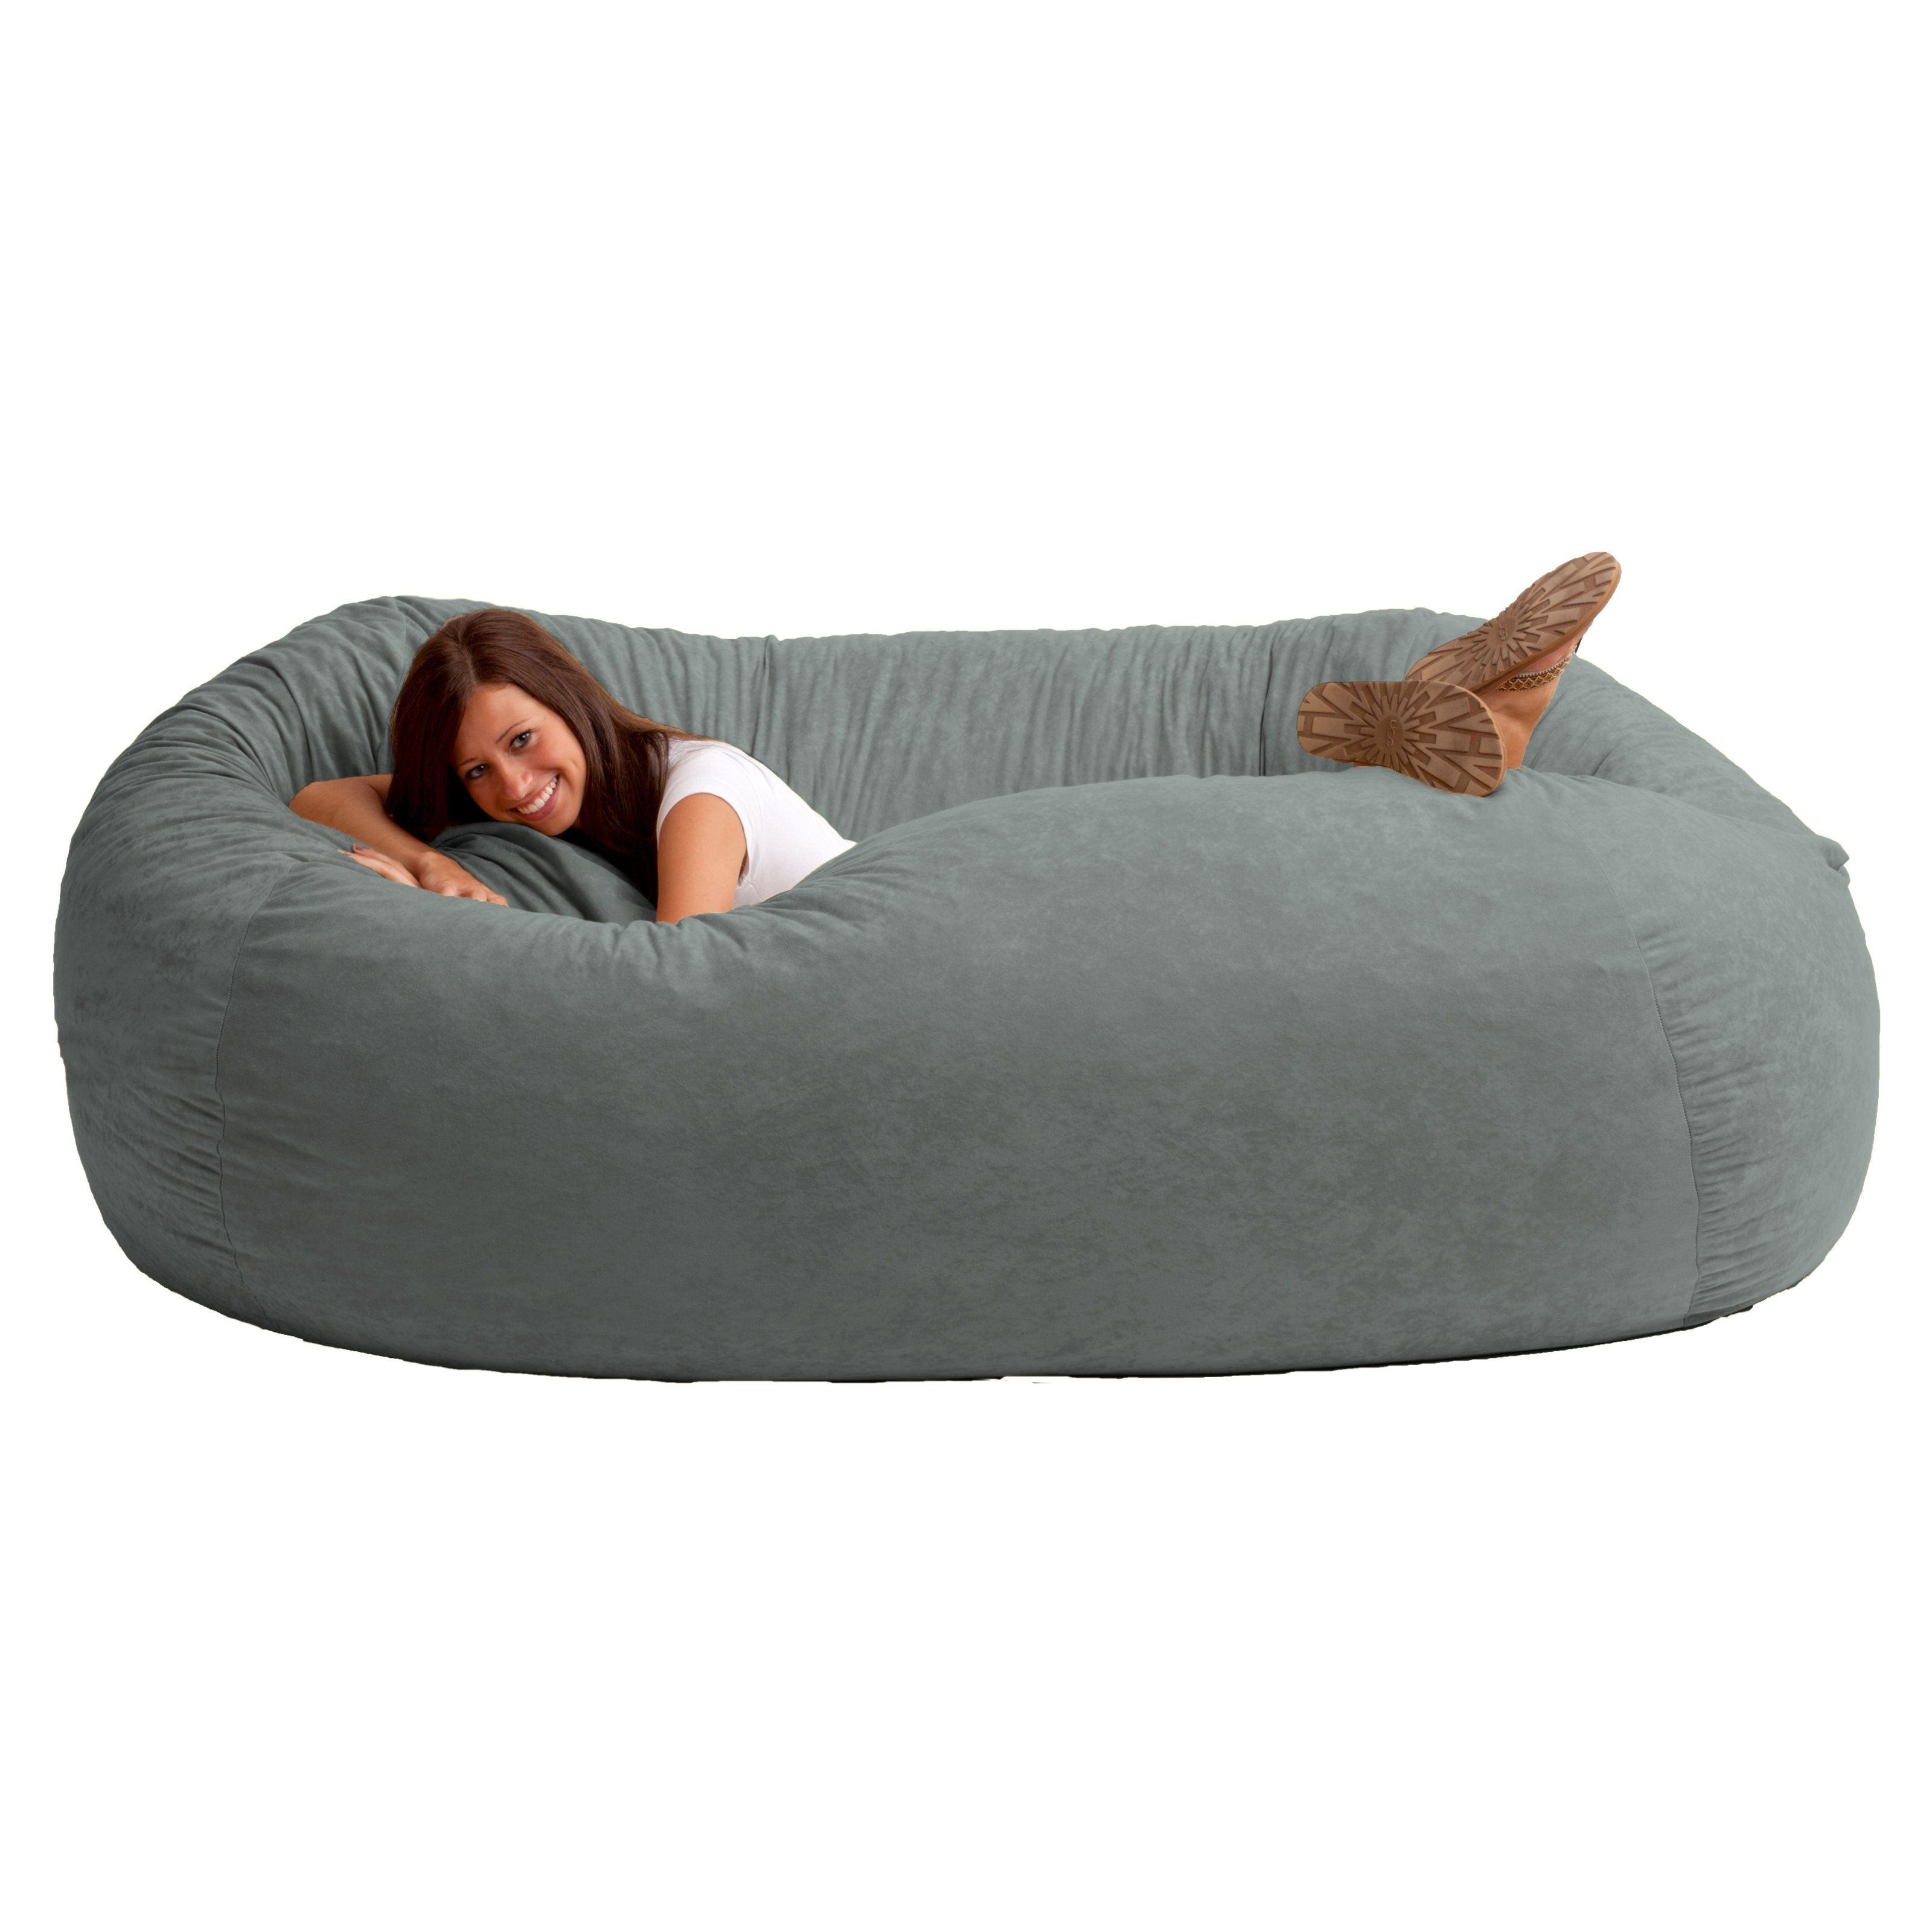 Fuf 7 Ft Xxl Comfort Suede Bean Bag Sofa Bean Bags At Hayneedle Throughout Bean Bag Sofas And Chairs (View 4 of 15)